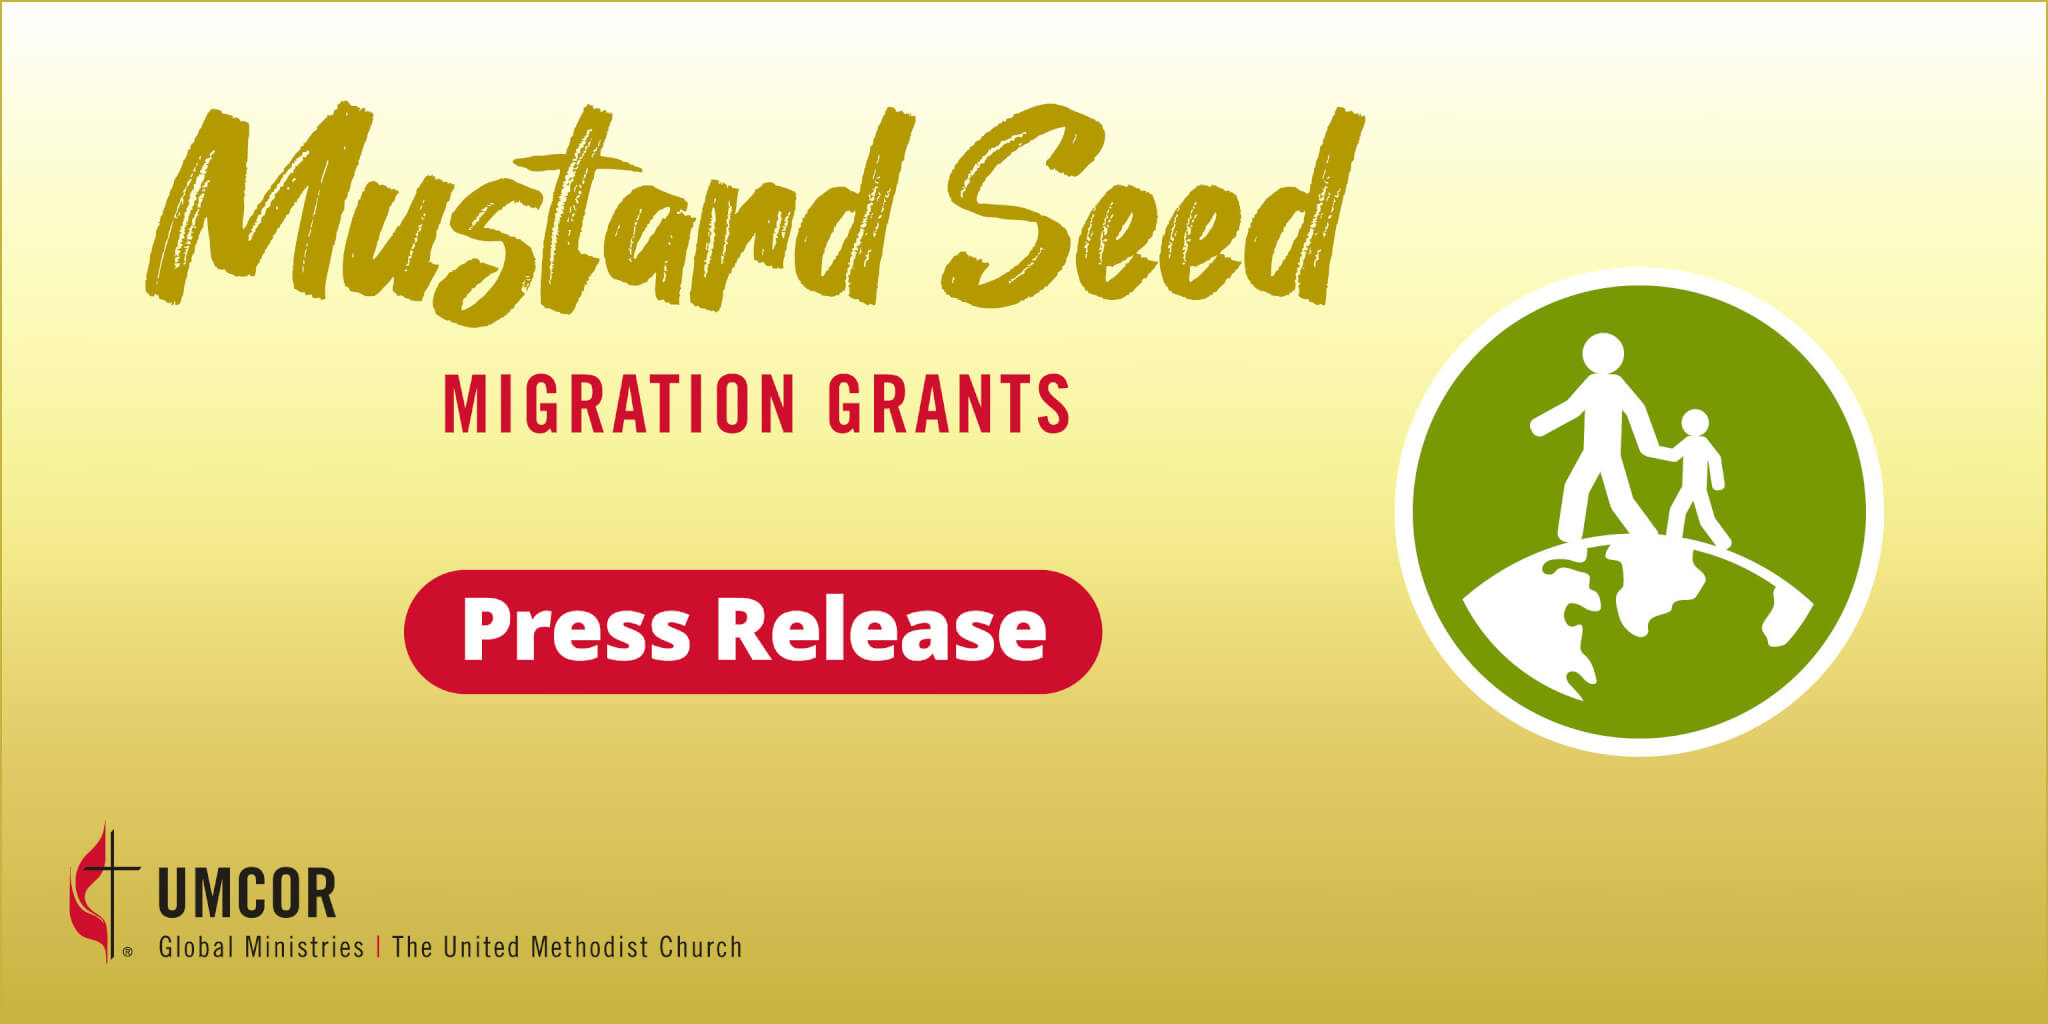 UMCOR Mustard Seed Migration Grants program accepting applications for 2023